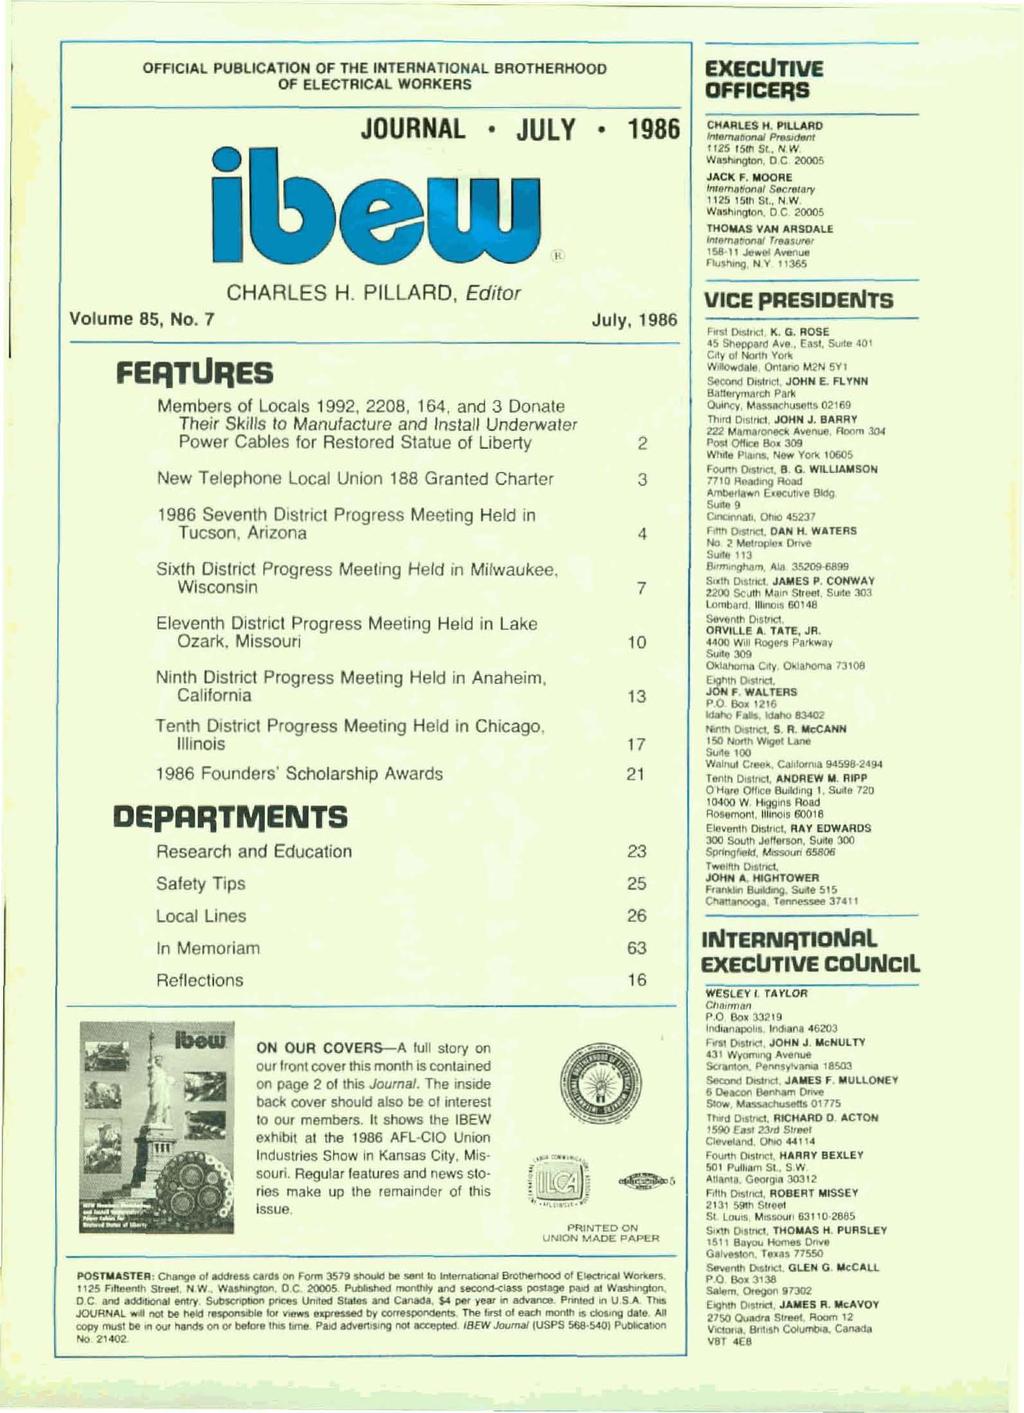 OFFICIAL PUBLICATION OF THE INTERNATIONAL BROTHERHOOD OF ELECTRICAL WORKERS I JOURNAL JULY 1986 CHARLES H. PILLARD, Editor Volume 85, No. 7 July, 1986 FEFlTLlFIES Members of Locals 1992, 2208.